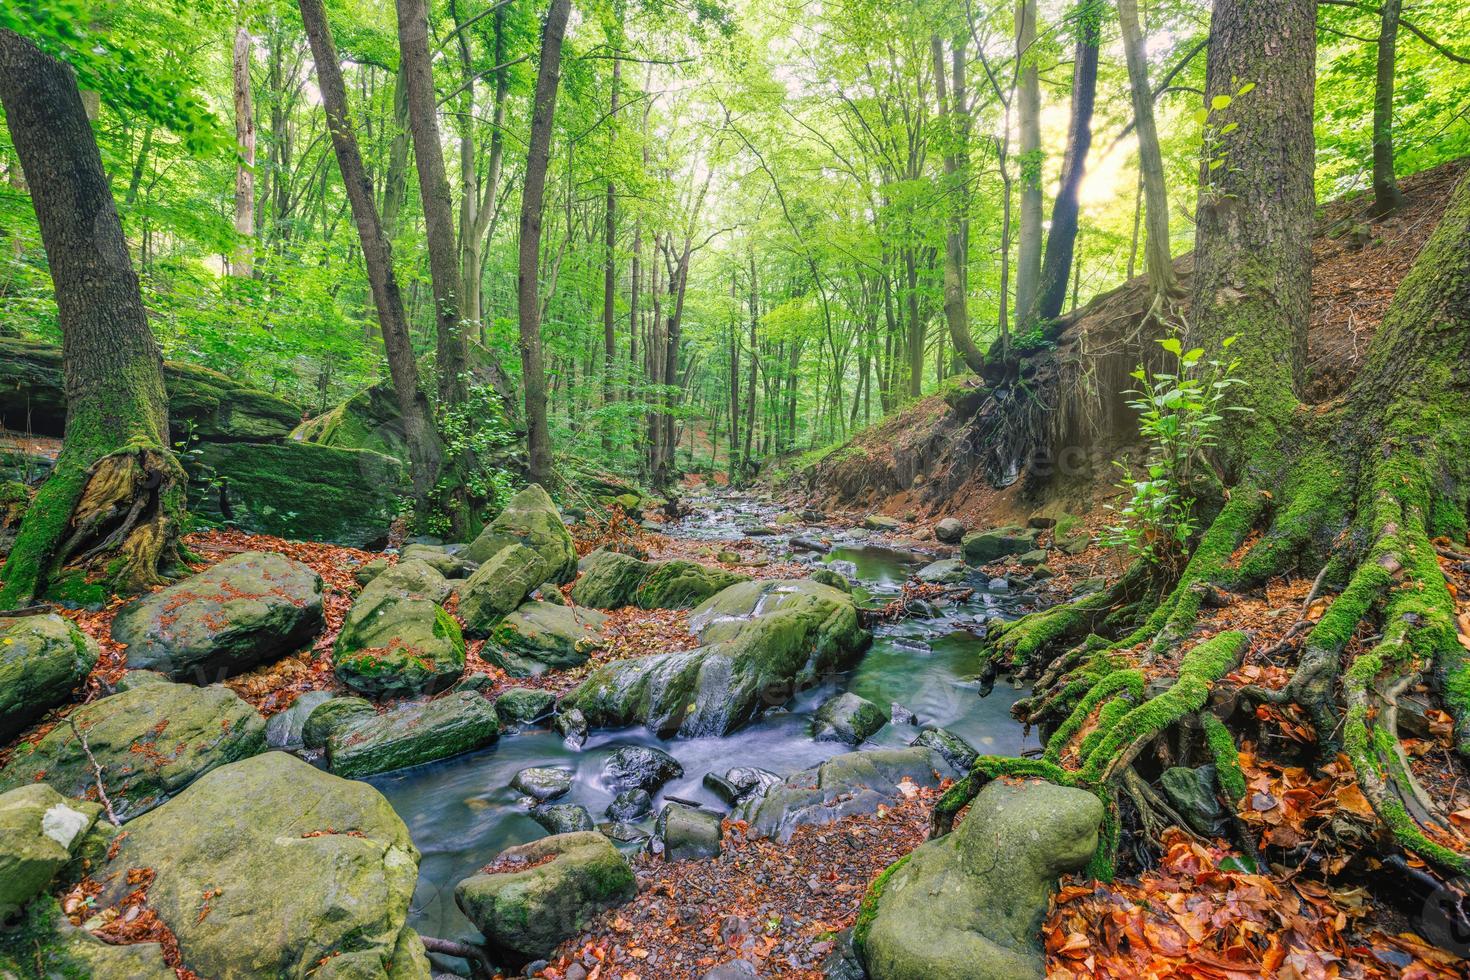 Green forest creek, stream of the Alps mountains. Beautiful water flow, sunny colorful mossy rocks nature landscape. Amazing peaceful and relaxing mountain nature scene, spring summer adventure travel photo